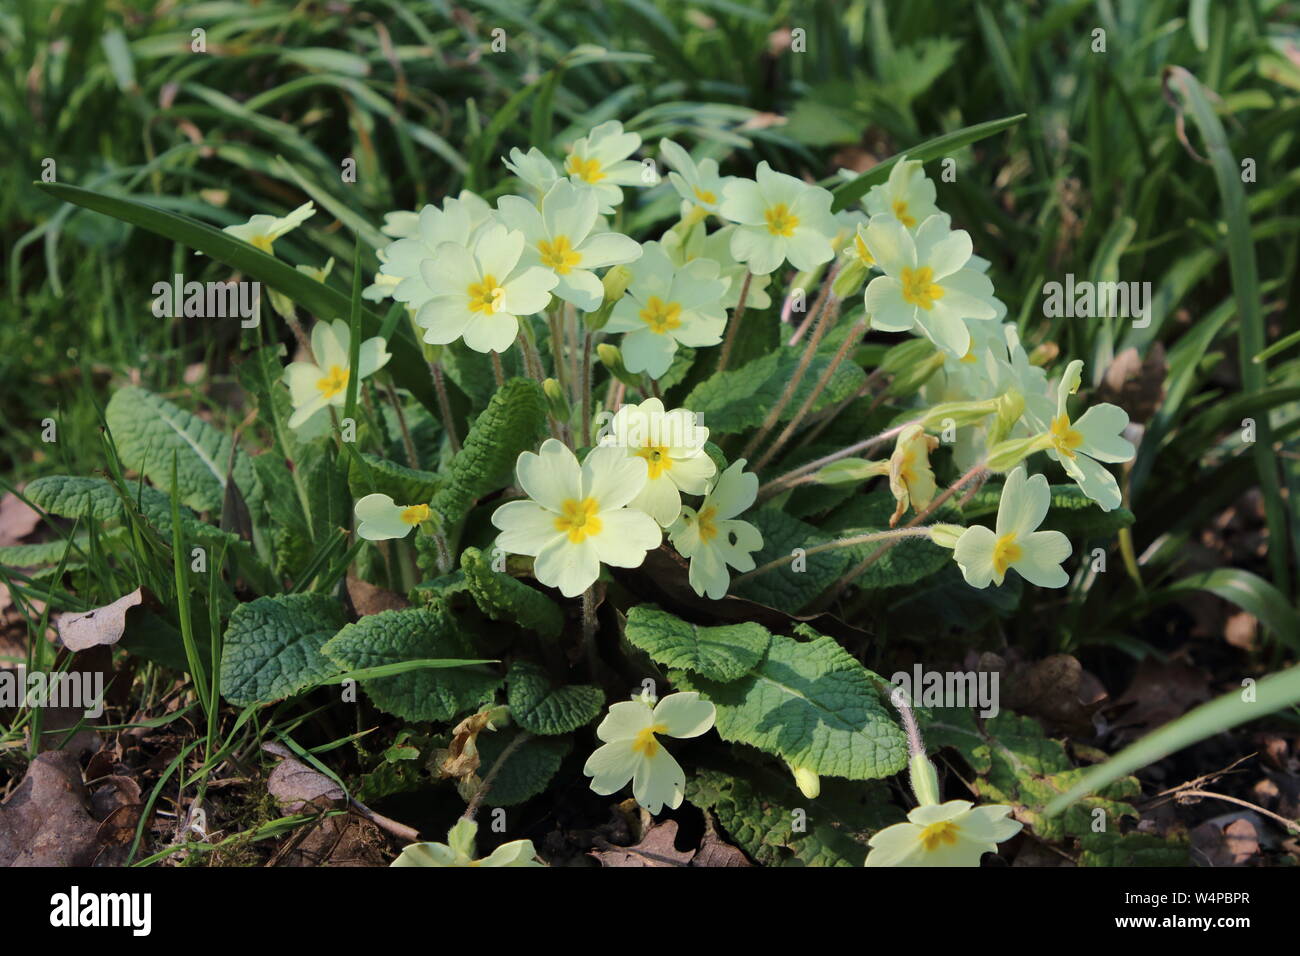 Primula Vulgaris The Common Primrose Is An Early Flowering Plant Of The Year Found In Hedgerows And Woodlands This Yellow Flower Is A Sign Of Spring Stock Photo Alamy